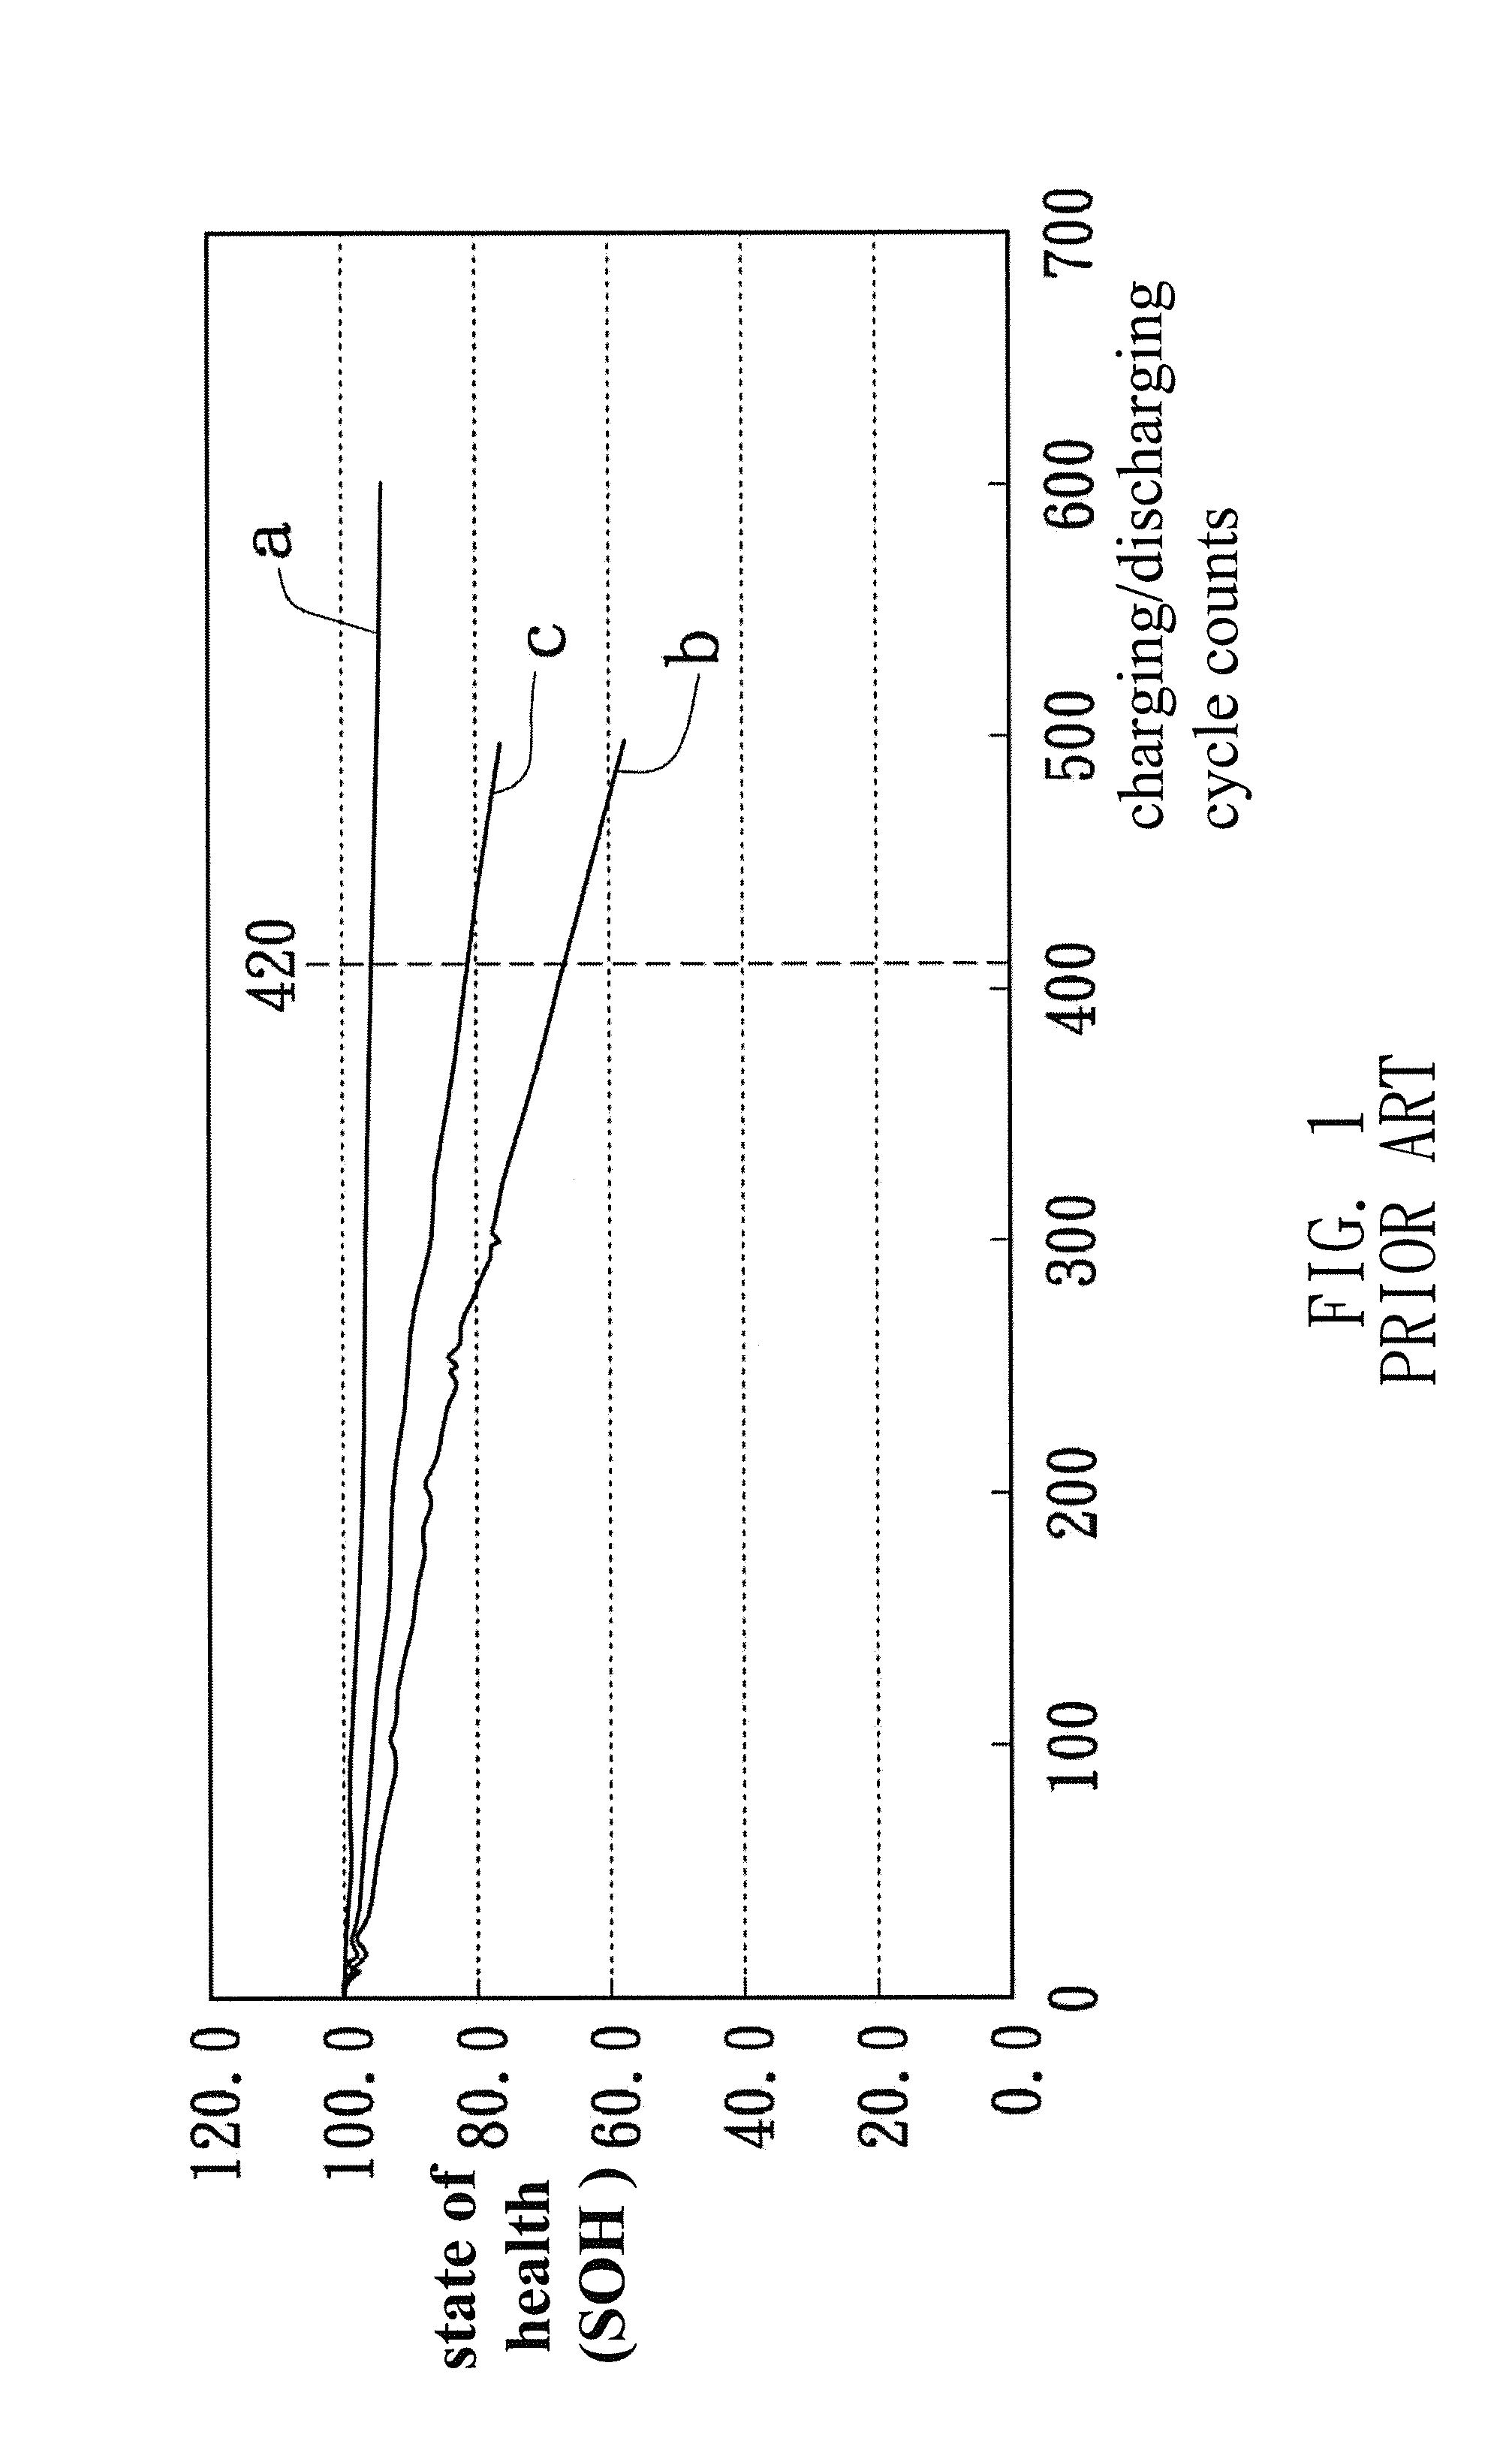 Discharge method for a battery pack